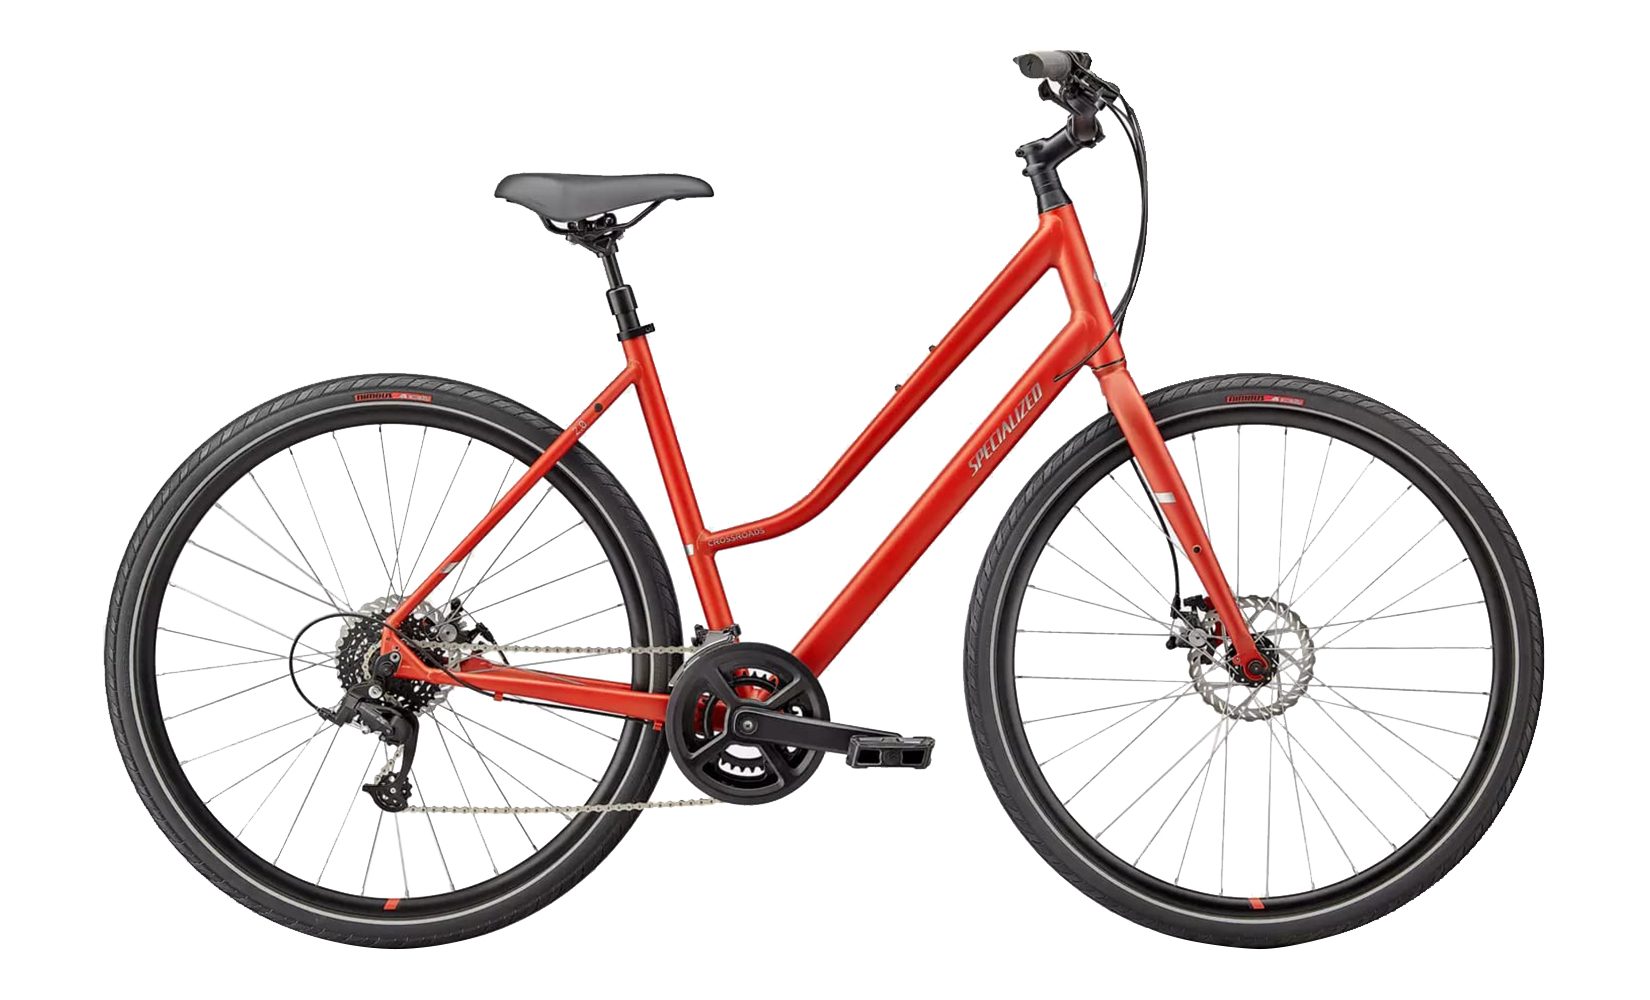  Specialized Crossroads 2.0 ST (Gloss Red Wood/Chrome)